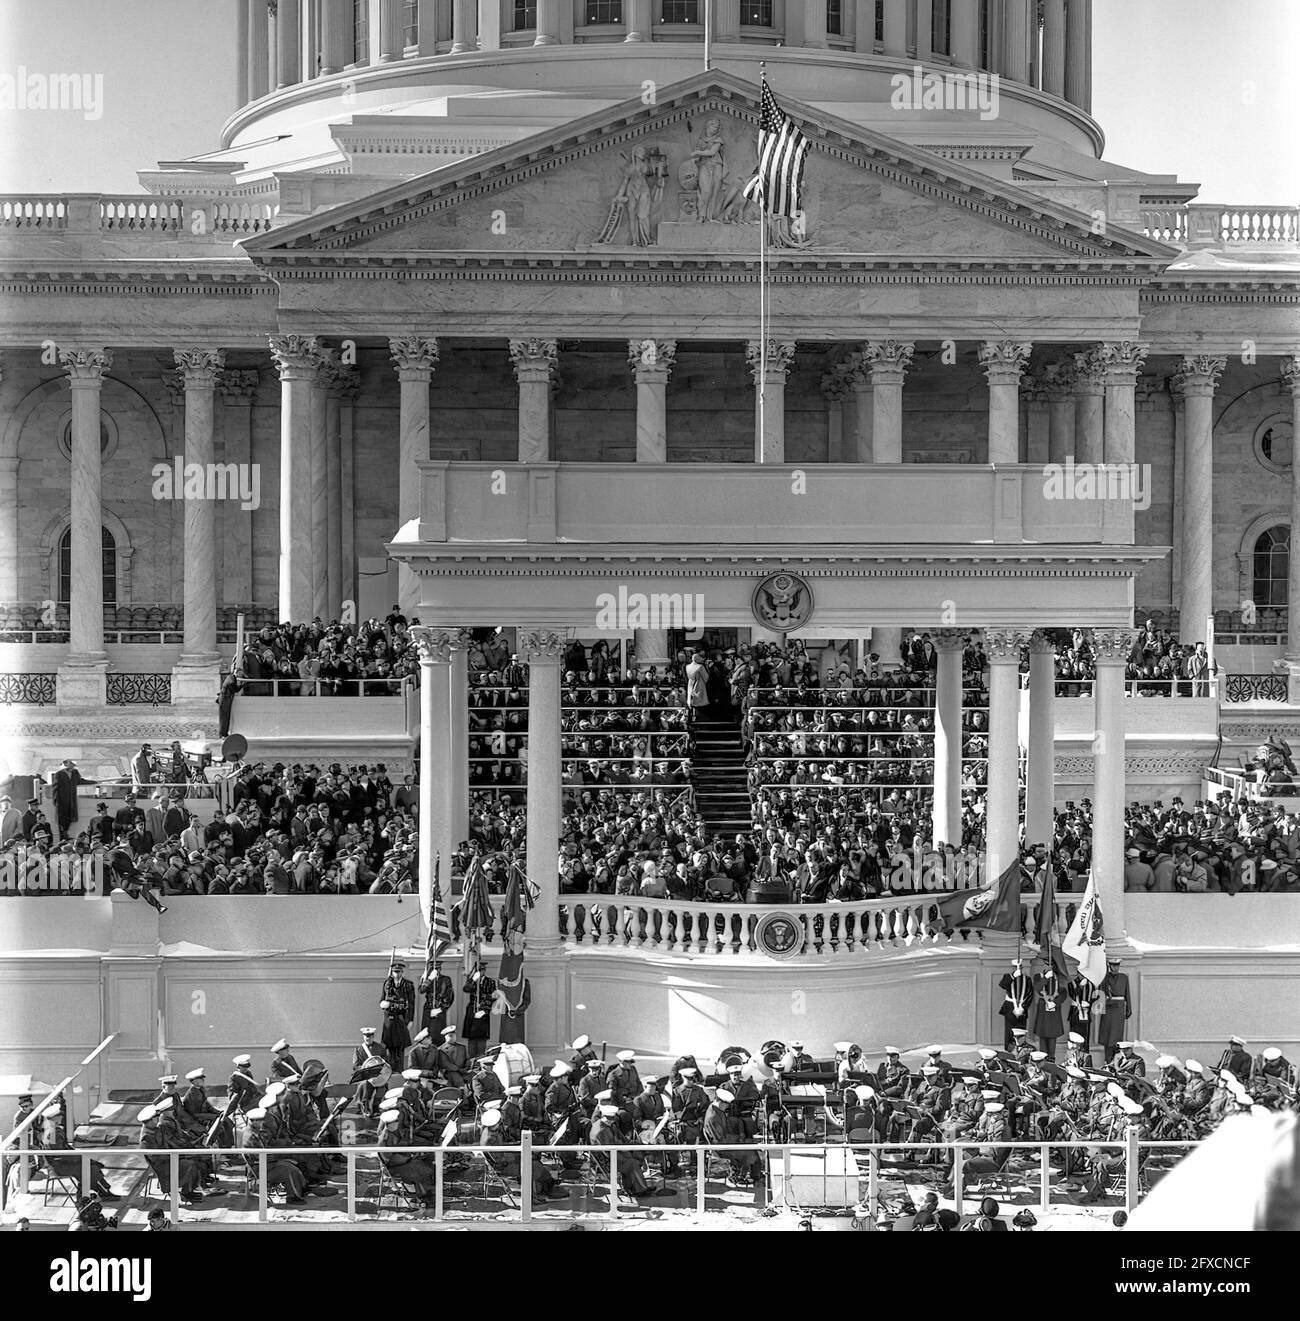 John F. Kennedy is sworn in as President at the United States Capitol Building, Washington, D.C. Stock Photo